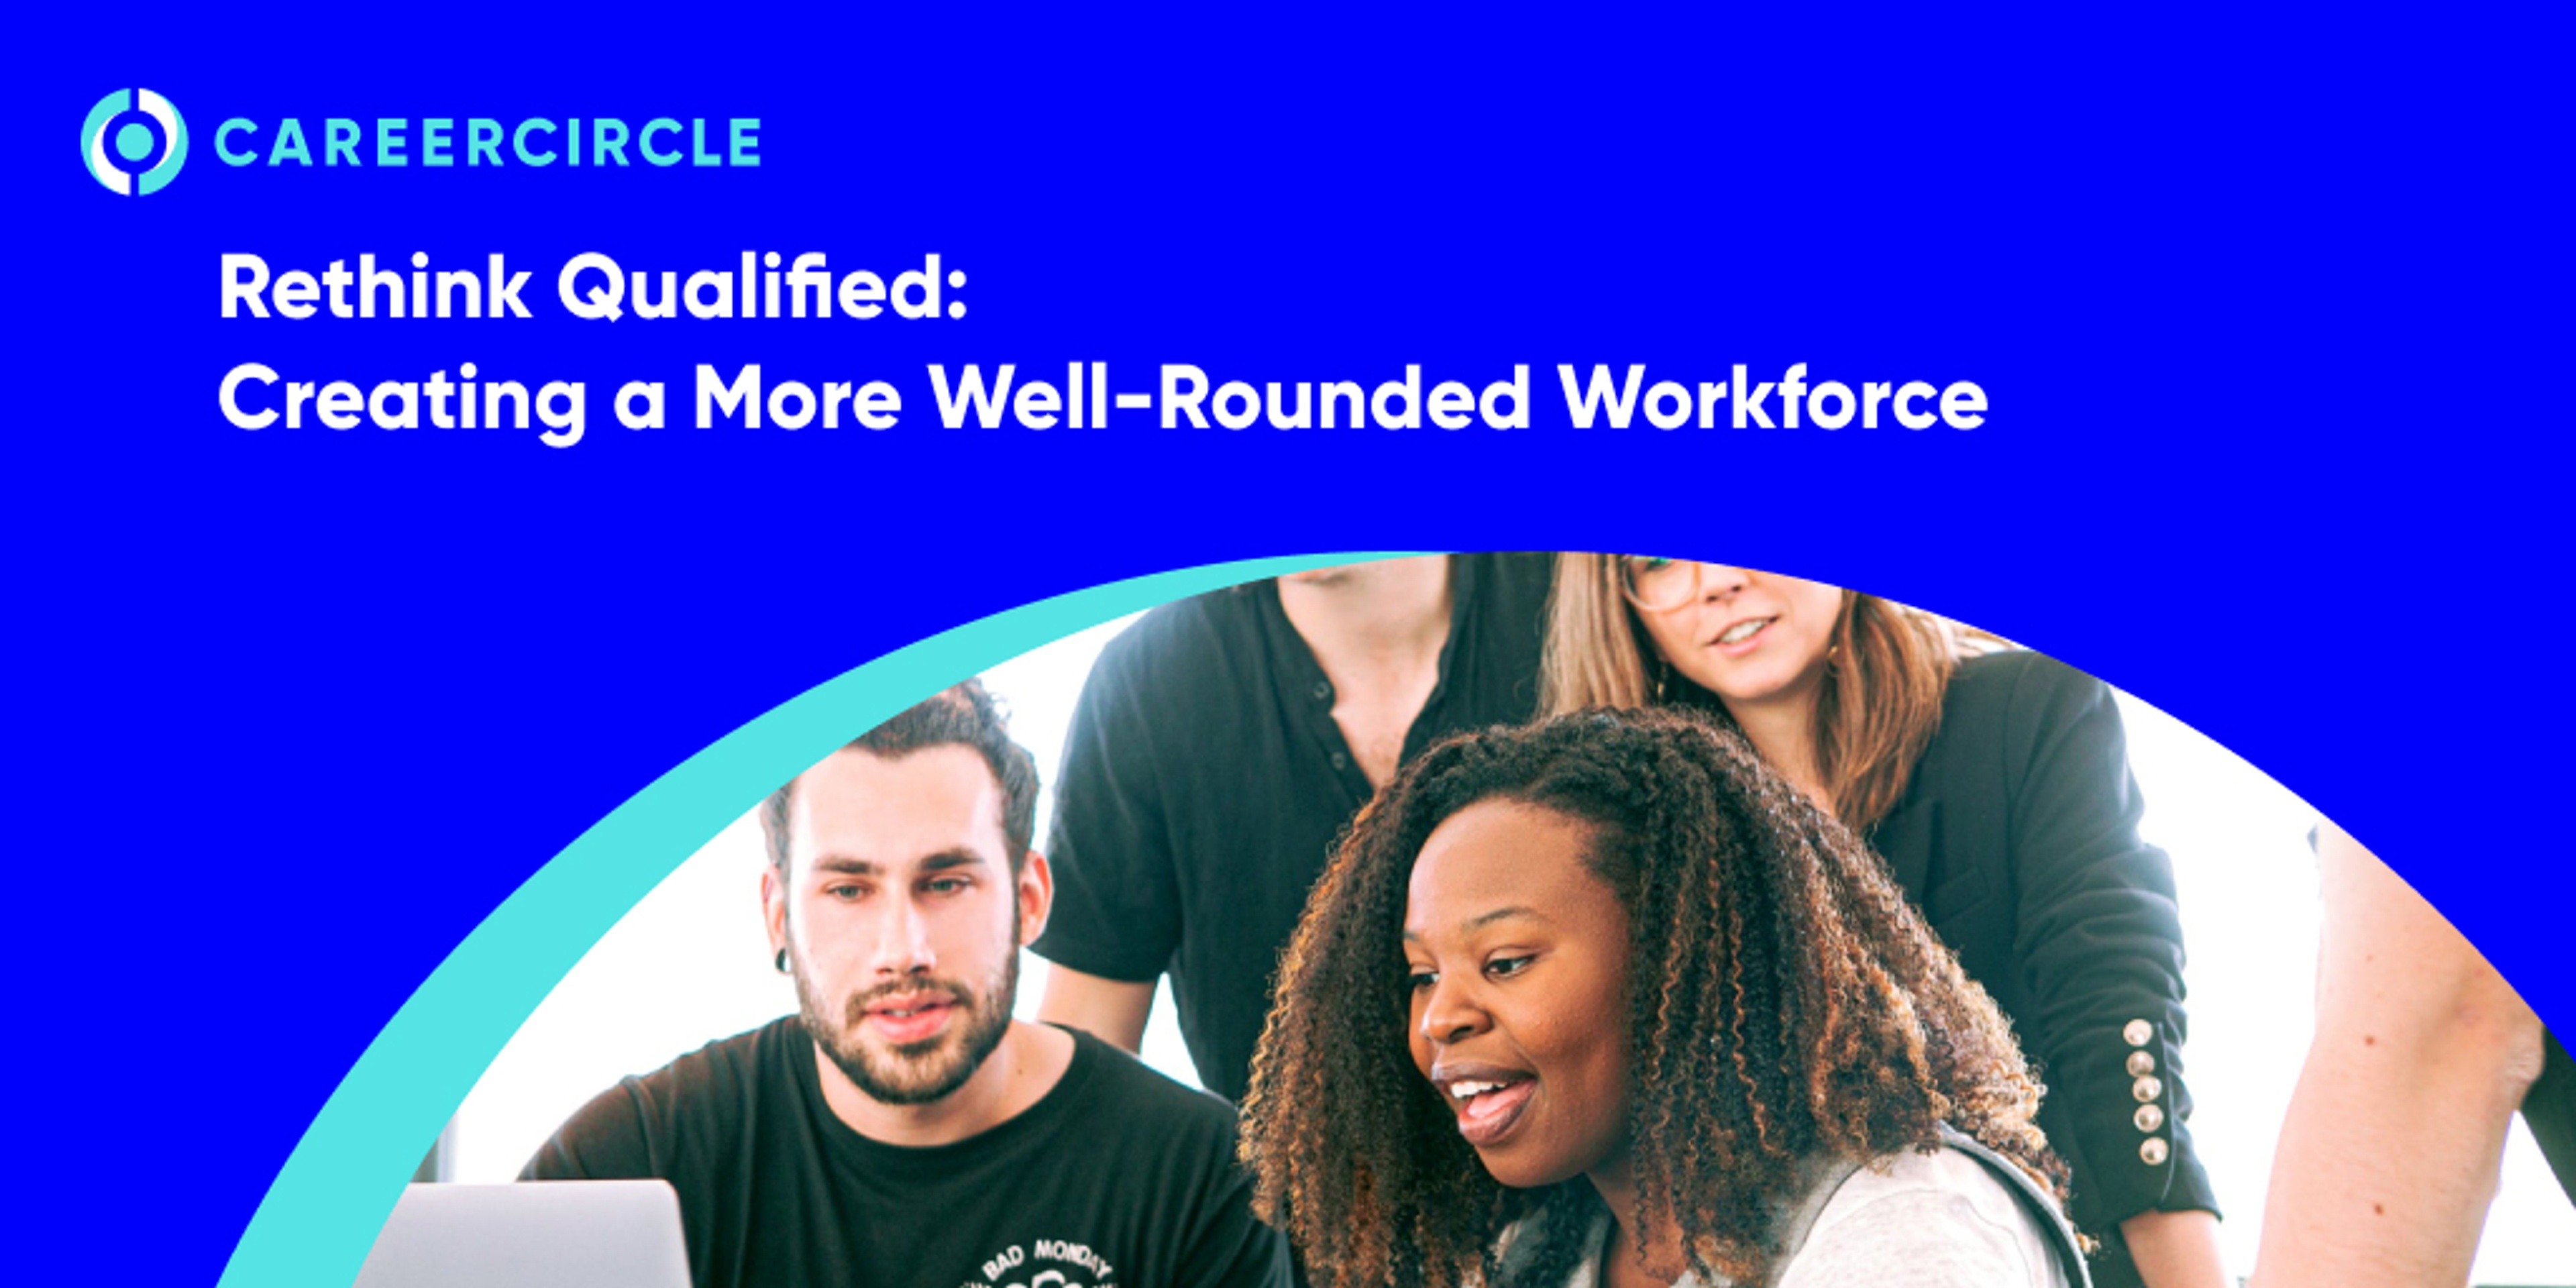 CareerCircle - "Rethink Qualified: Creating a More Well-Rounded Workforce" with an image of people crowding around a computer